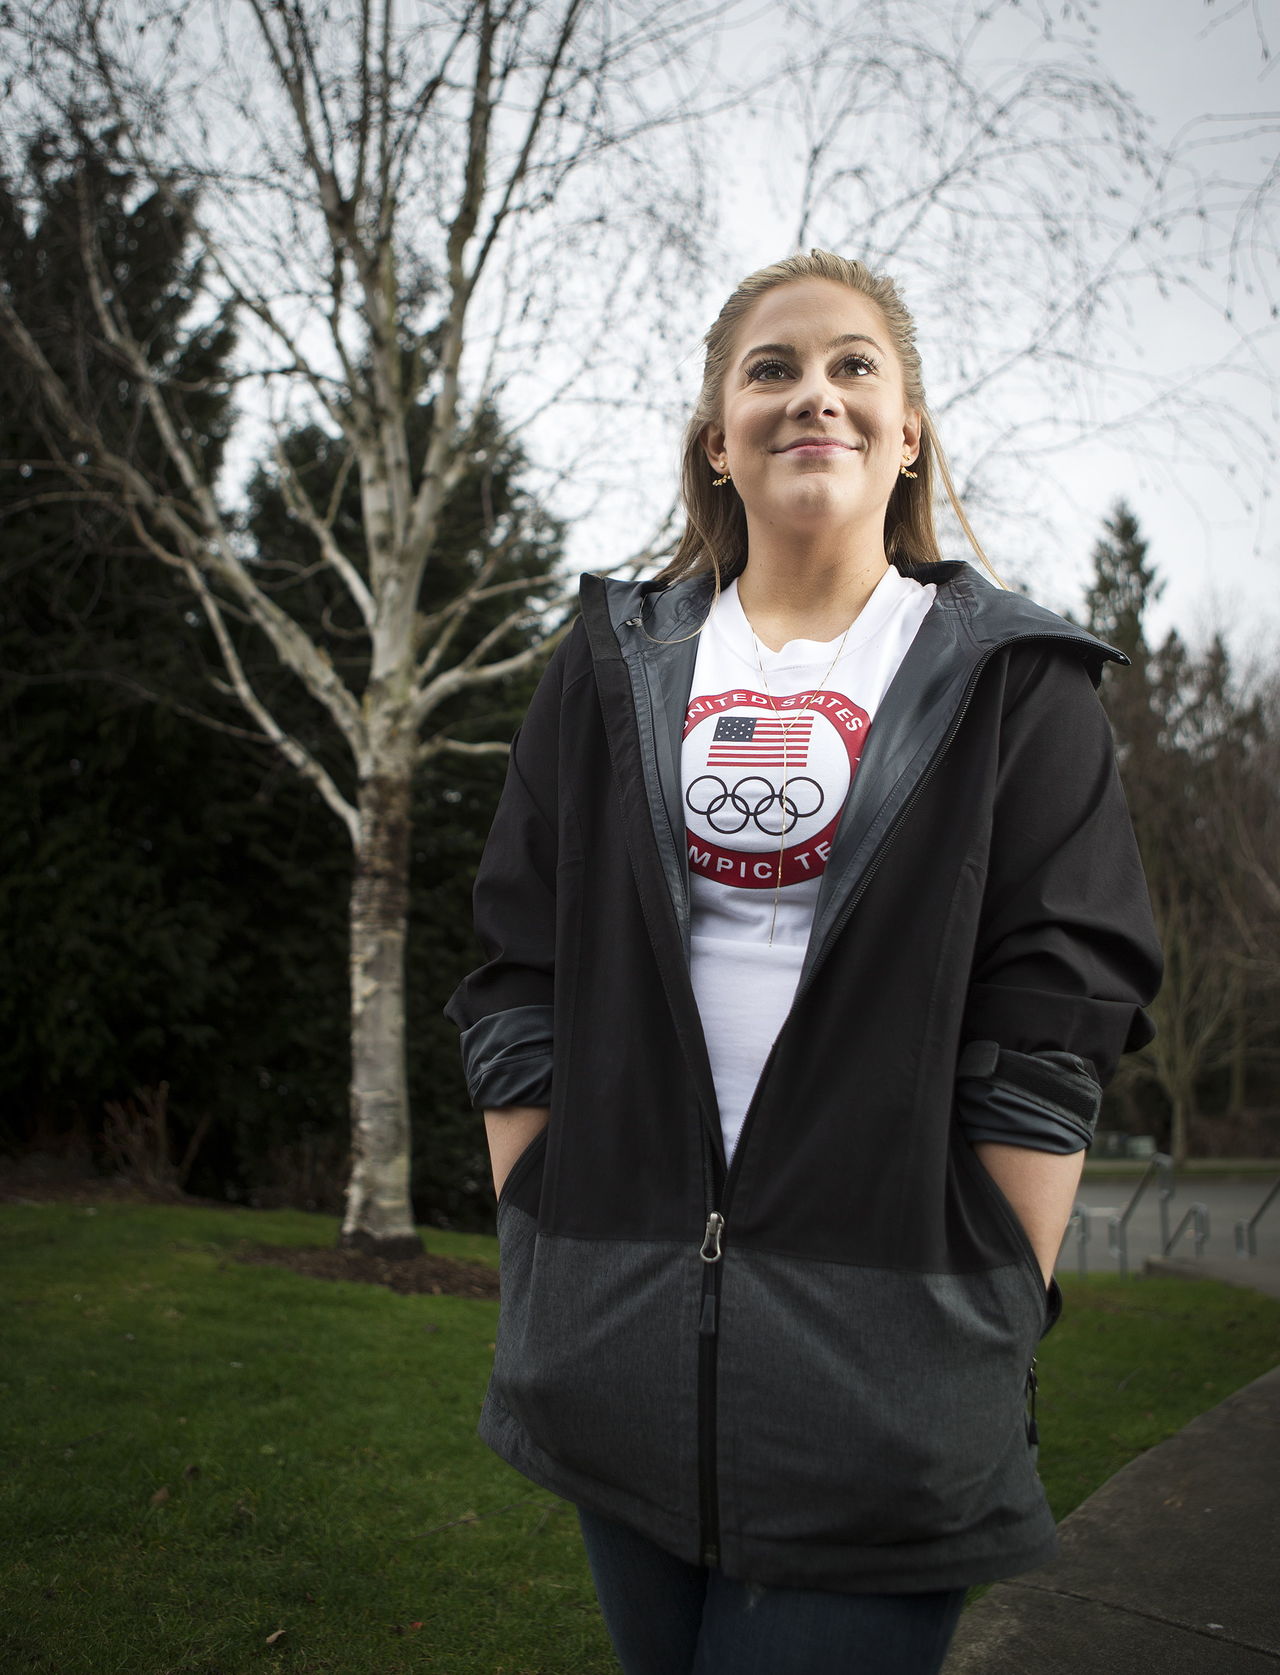 Former Olympian gymnast Shawn Johnson stands for a portrait in Mukilteo on Thursday. Johnson is in town to promote the Pacific Rim Championships which will be held in Everett at the beginning of April.